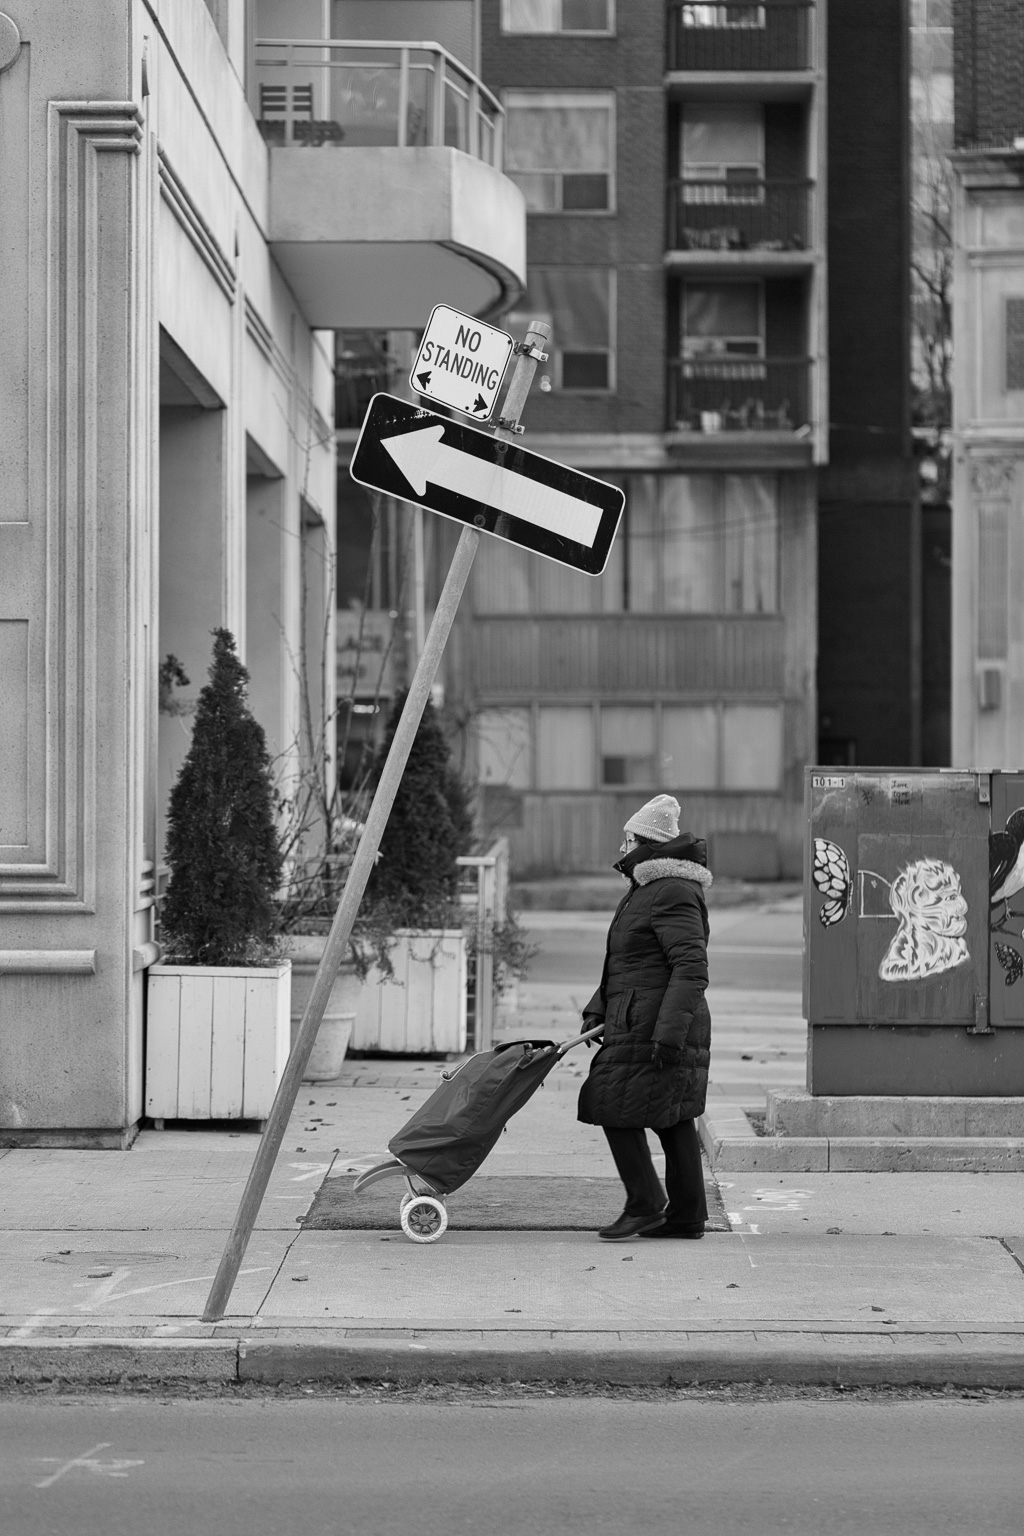 A woman pushes a bundle buggy along the sidewalk while, overhead, an arrow points off at an inclined angle.